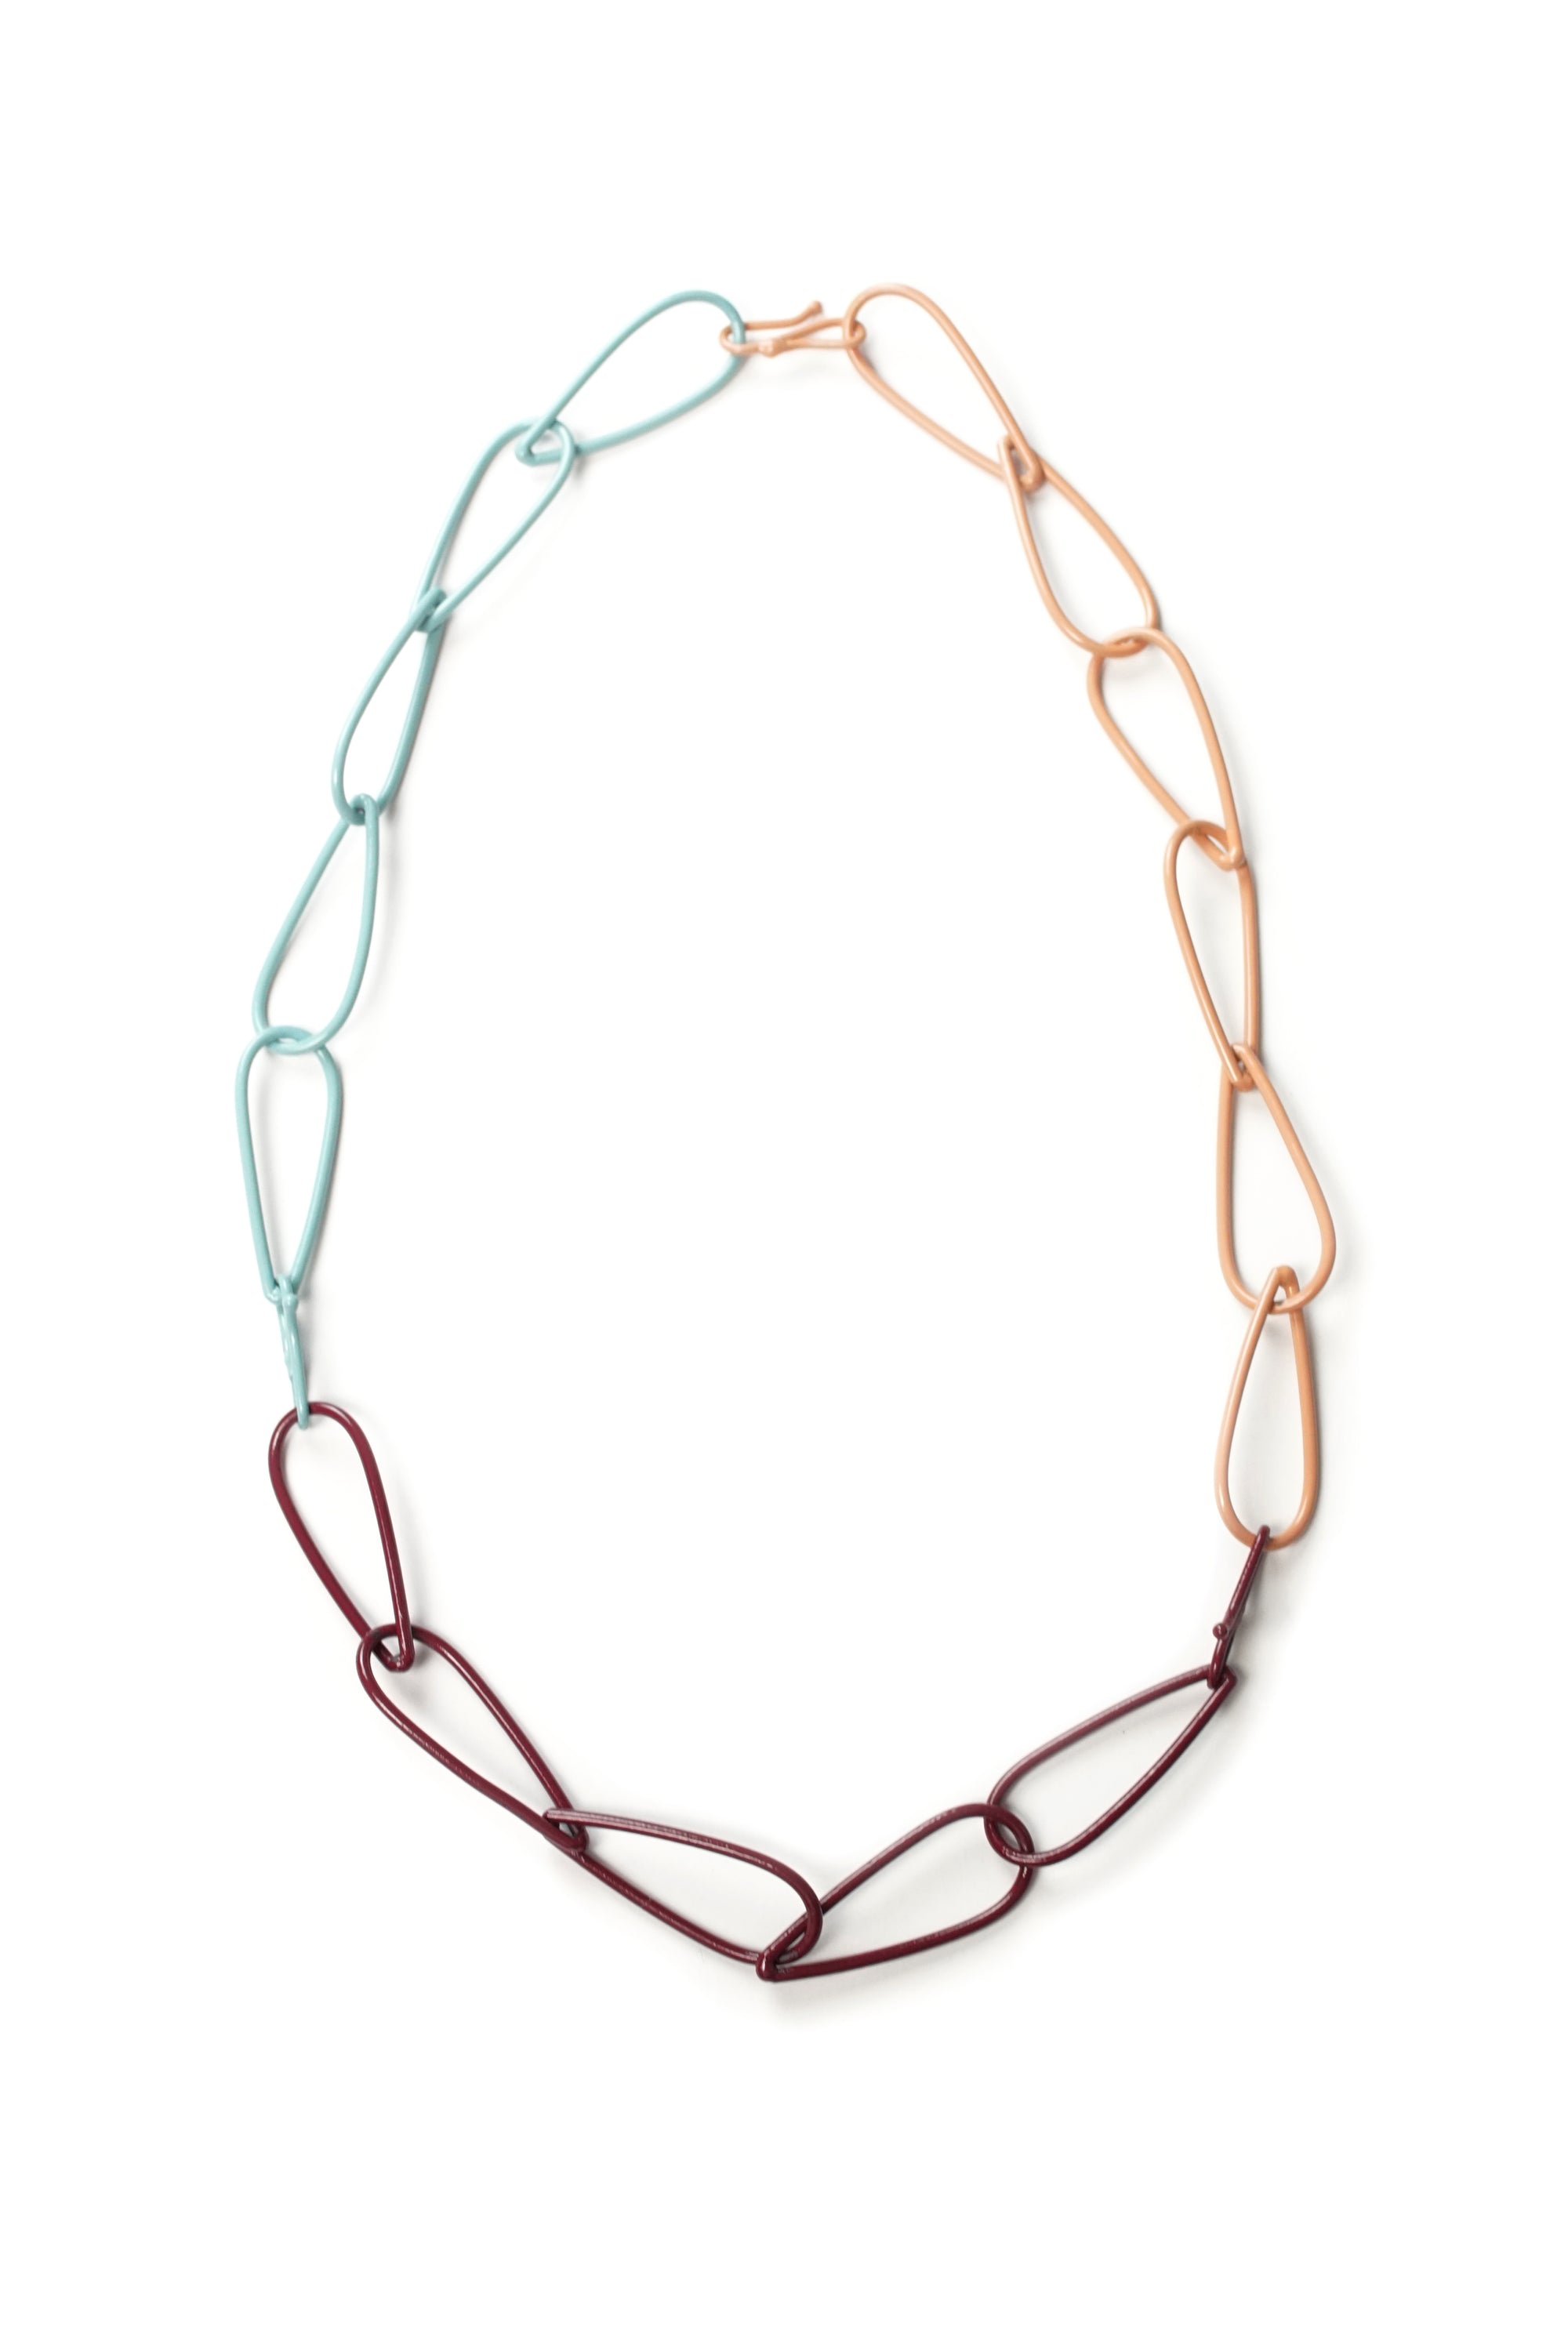 Modular Necklace in Lush Burgundy, Faded Teal, and Dusty Rose